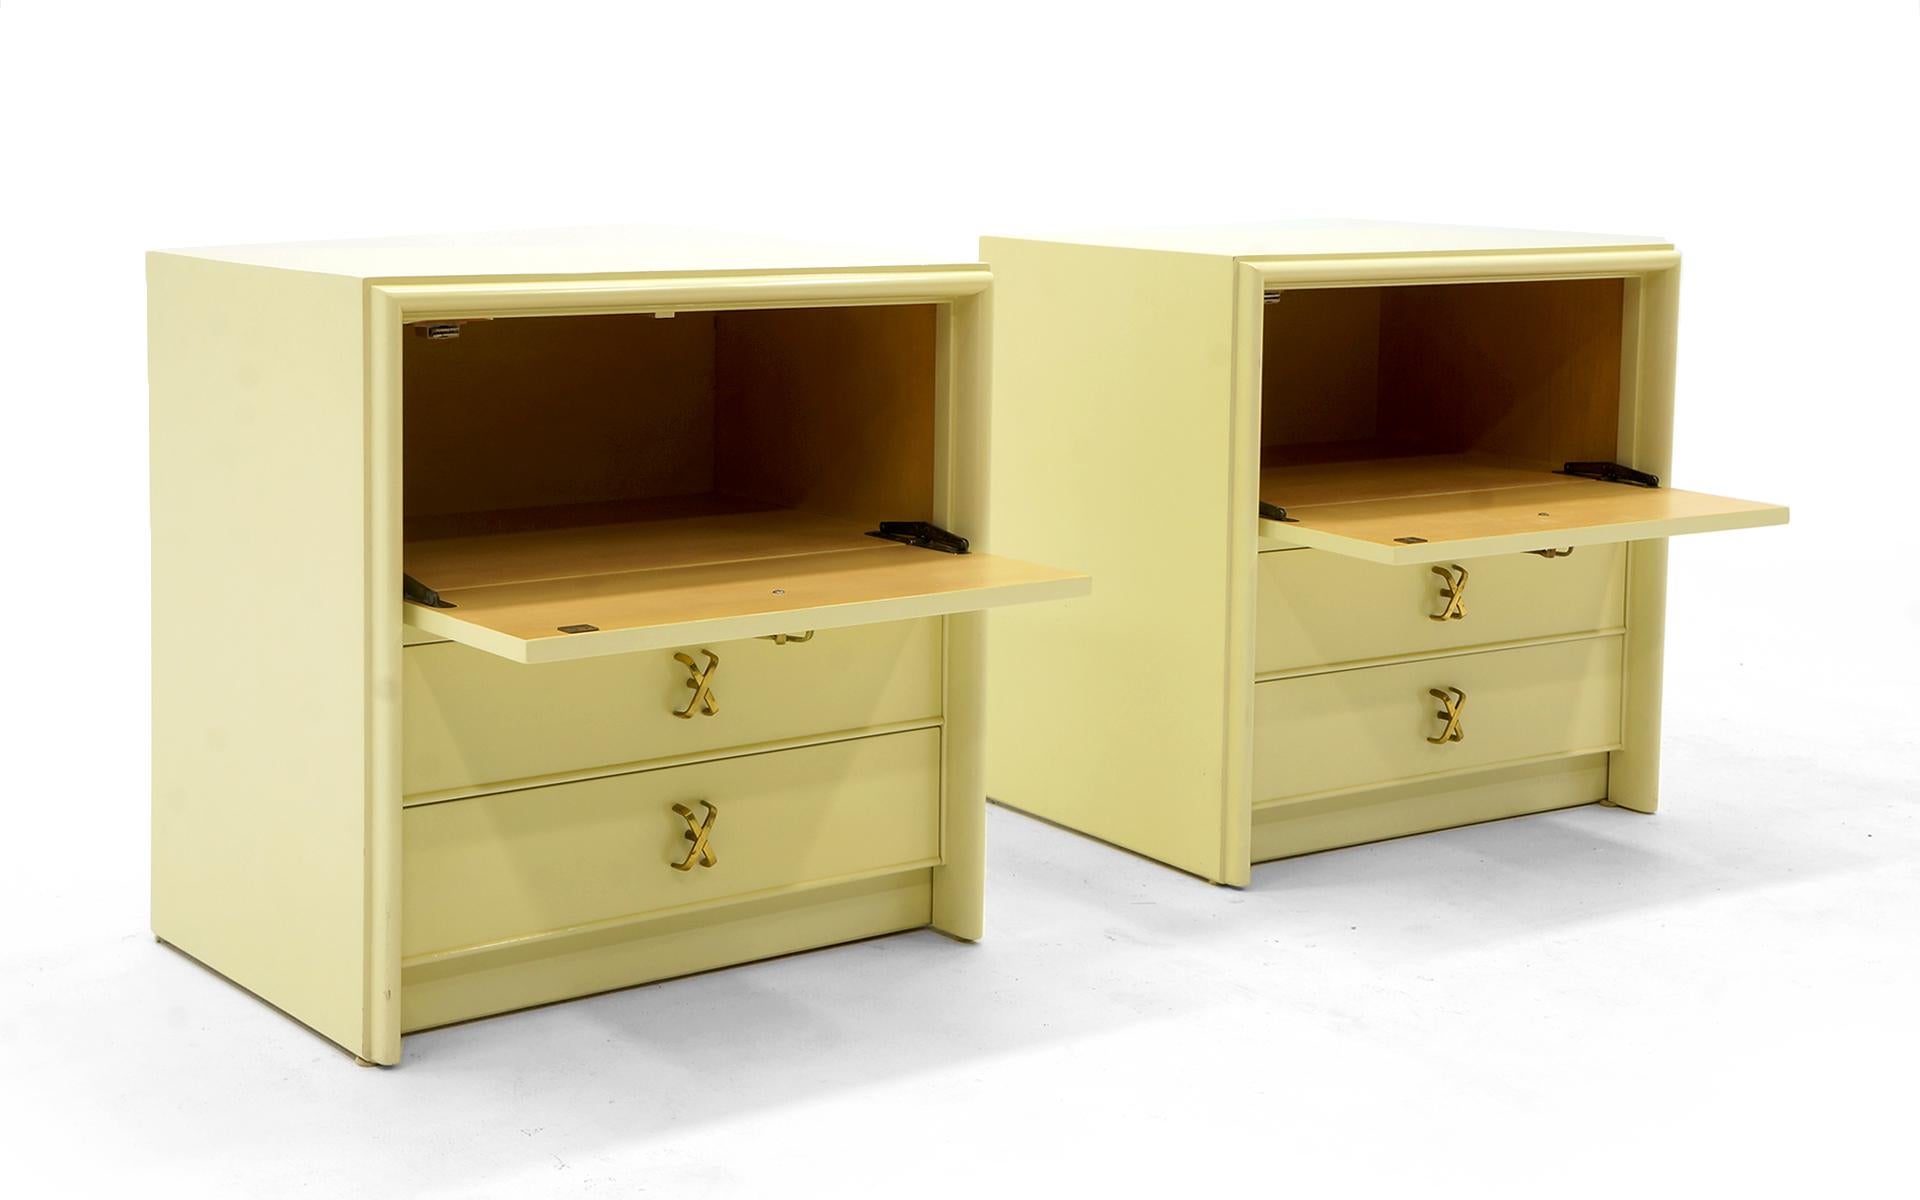 Mid-Century Modern Pair of Nightstands by Paul Frankl, All Original Including the Brass X Pulls